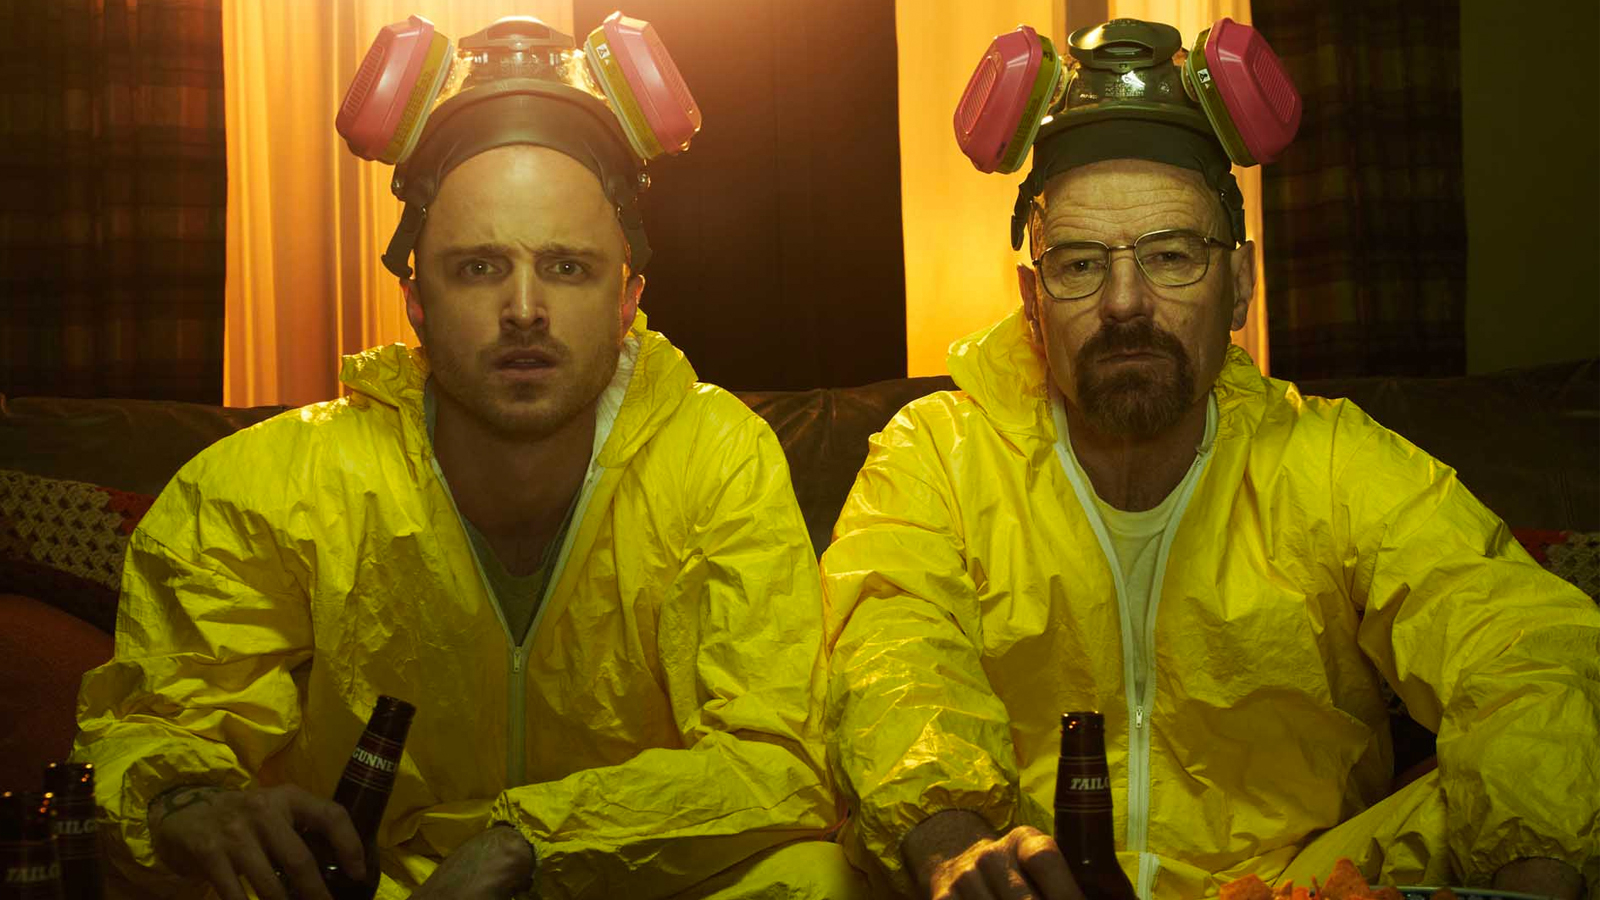 5 Shows ‘Breaking Bad’ Fans Will Also Love